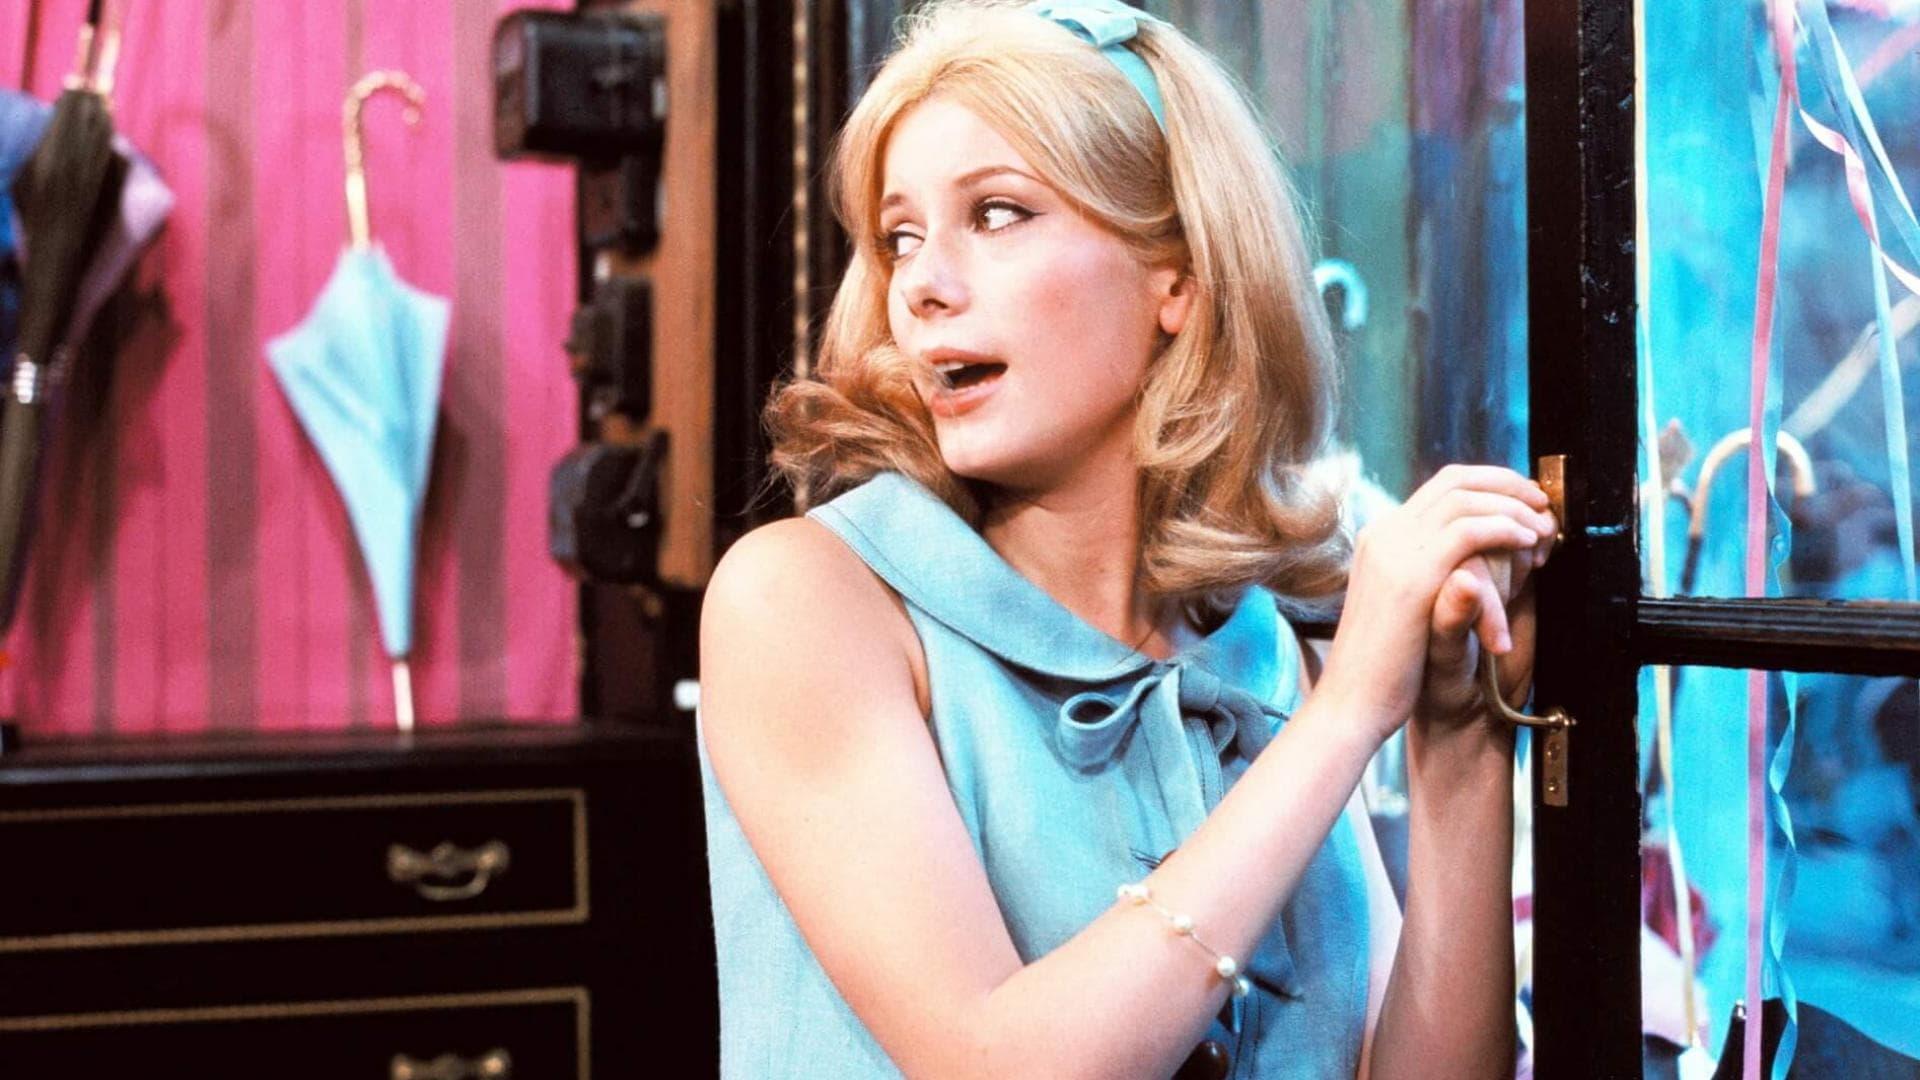 The Umbrellas of Cherbourg backdrop